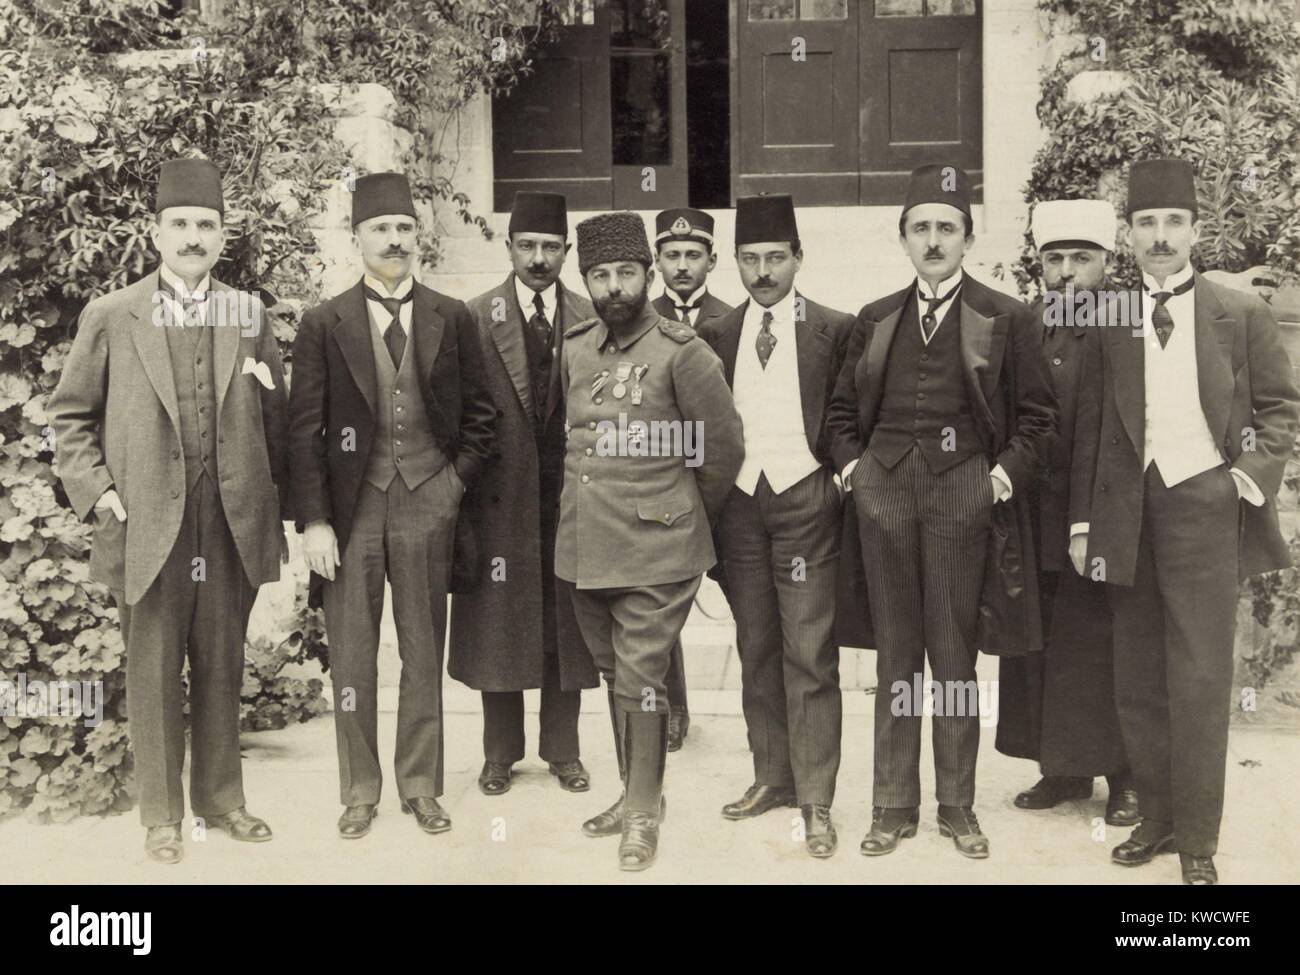 Cemal Pasha and members of the Turkish Parliament in Jerusalem, 1916. He had military success in Iraq in 1915, but left Palestine after Turkish troops faltered in 1917 (BSLOC 2017 1 110) Stock Photo